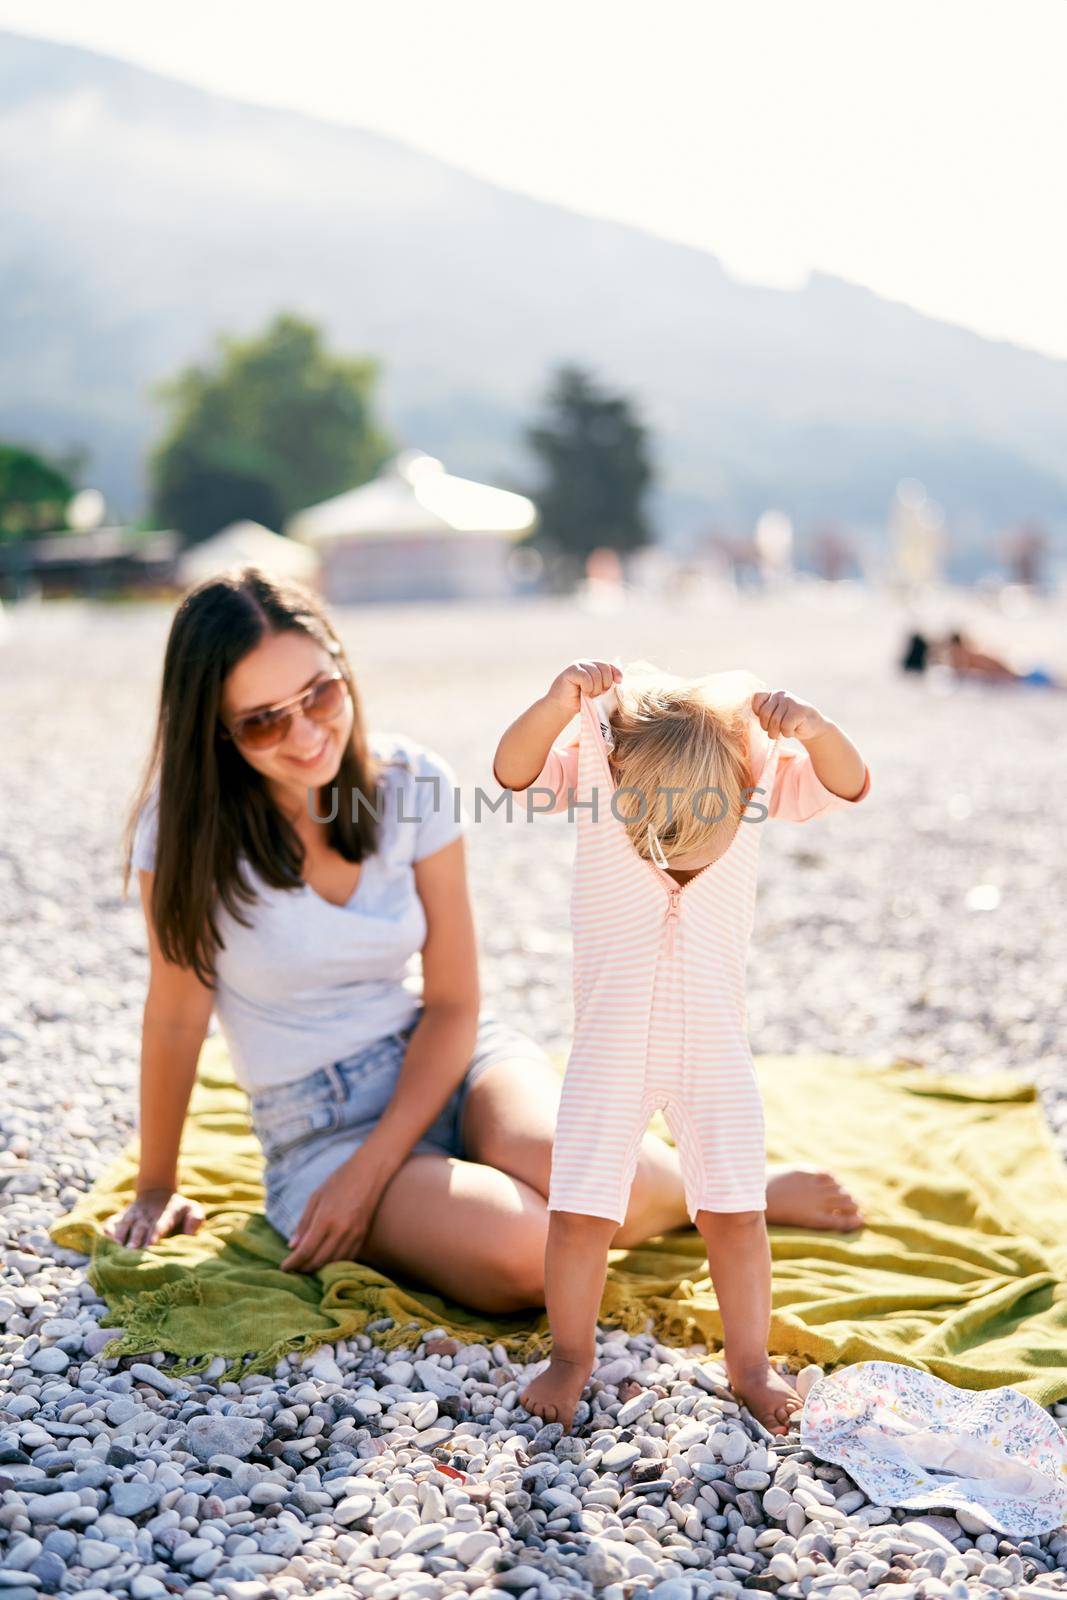 Little girl pulls off overalls while standing on the beach. High quality photo